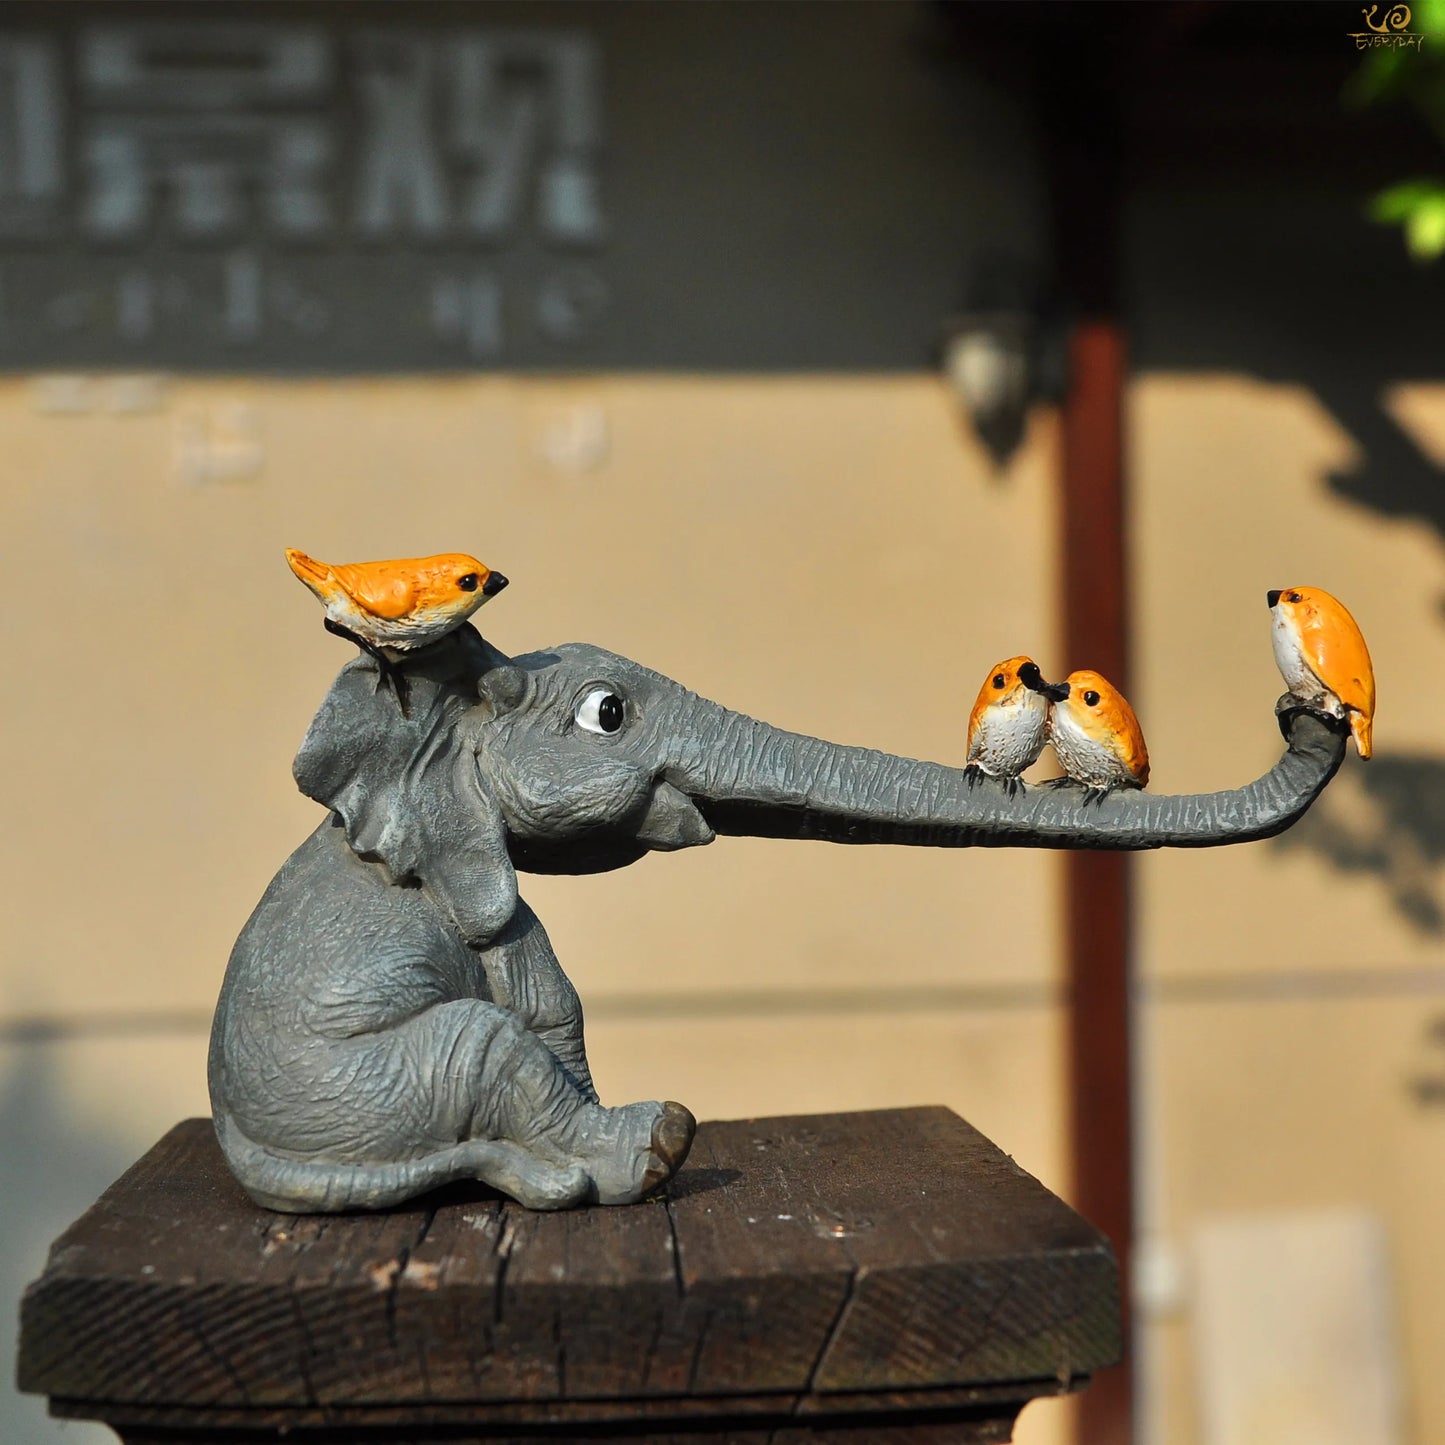 Everyday collection lucky elephant figurines